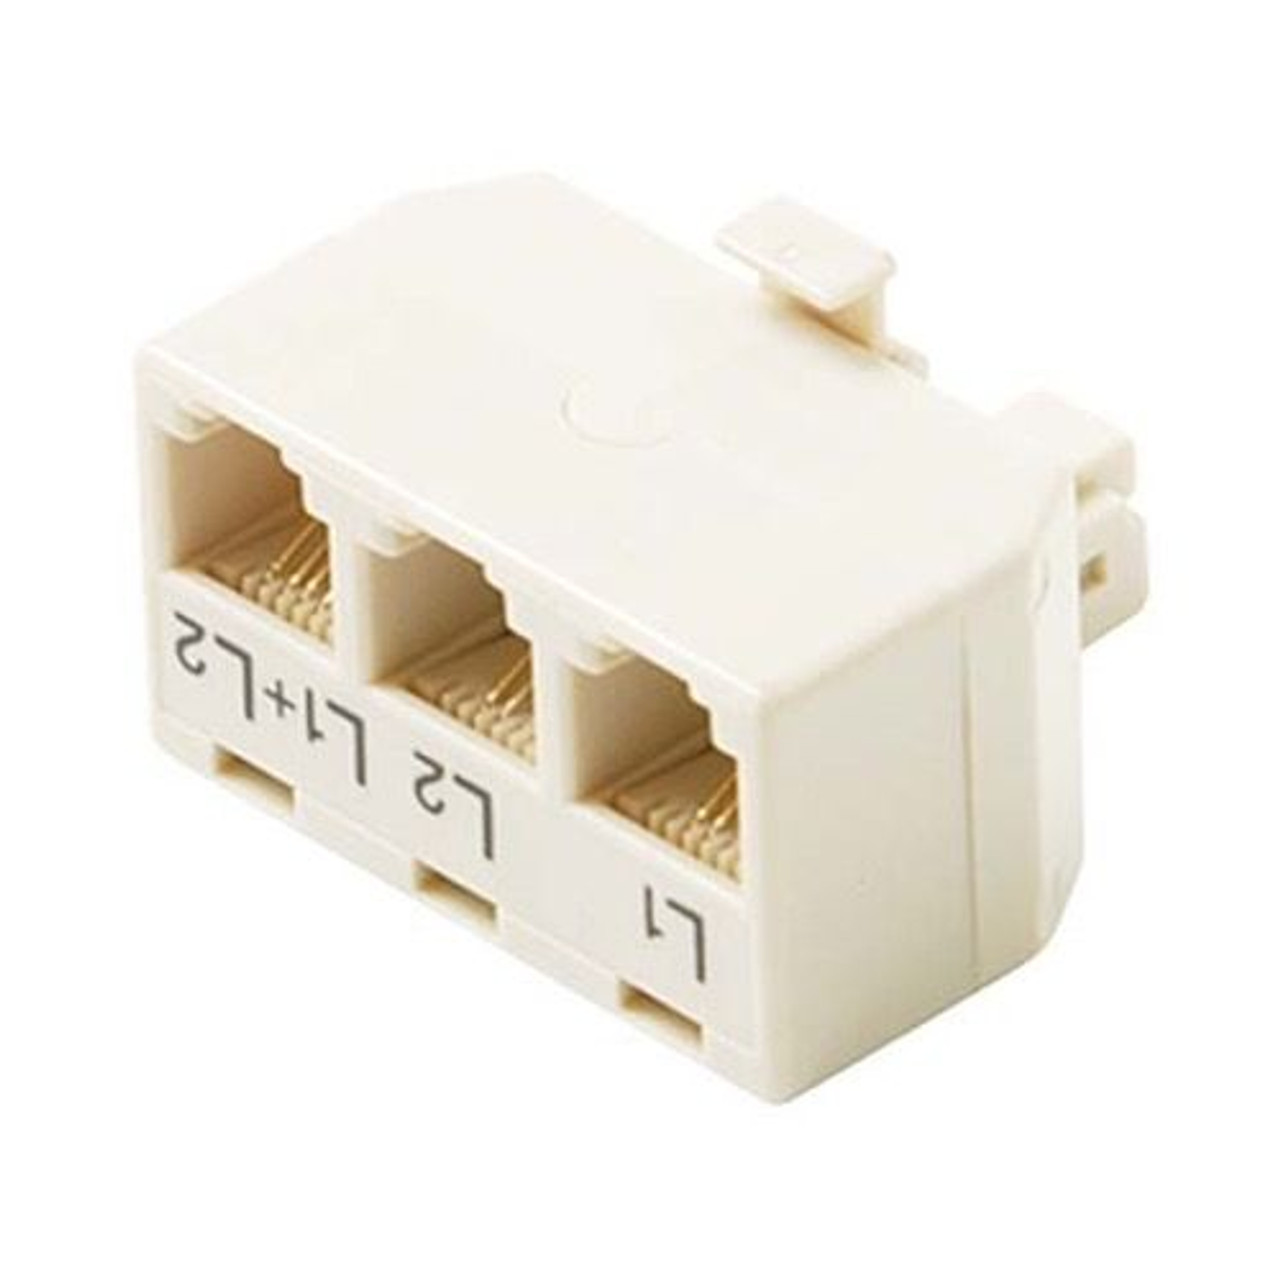 Steren 300-324 Telephone T Adapter 3 Way Jack 2 Line Splitter 6P4C 4 Conductor White RJ11 Triplex Modular 4C Tee Jack 1 Line 6X2 2 Line 6X2 Line 1+2 6X4 Jack to 6X4 Plug UL High Impact ABS Plastic Gold Contacts